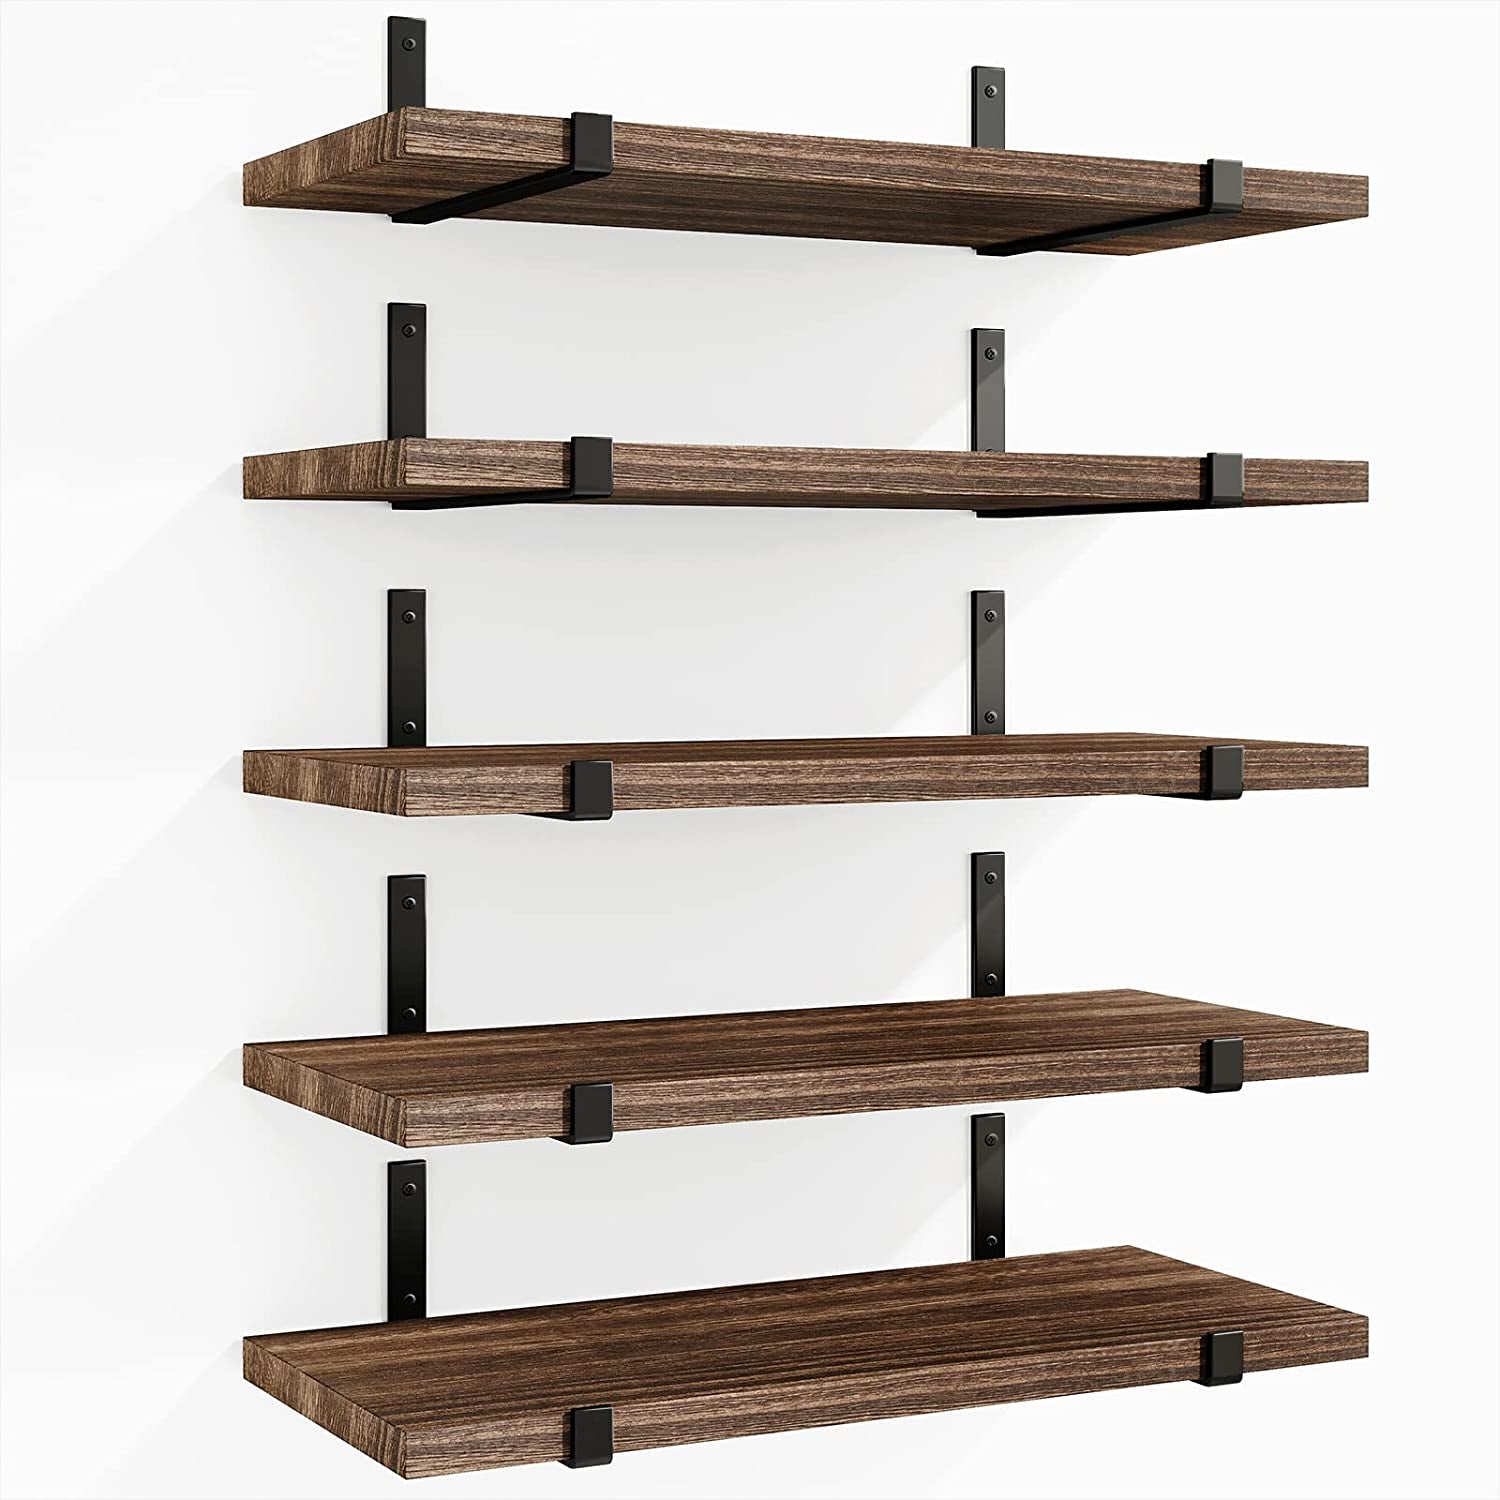 Fixwal Floating Shelves, Width 4.7In Wall Shelves Set of 5, Rustic Wood Wall (Dark Carbonized Black)